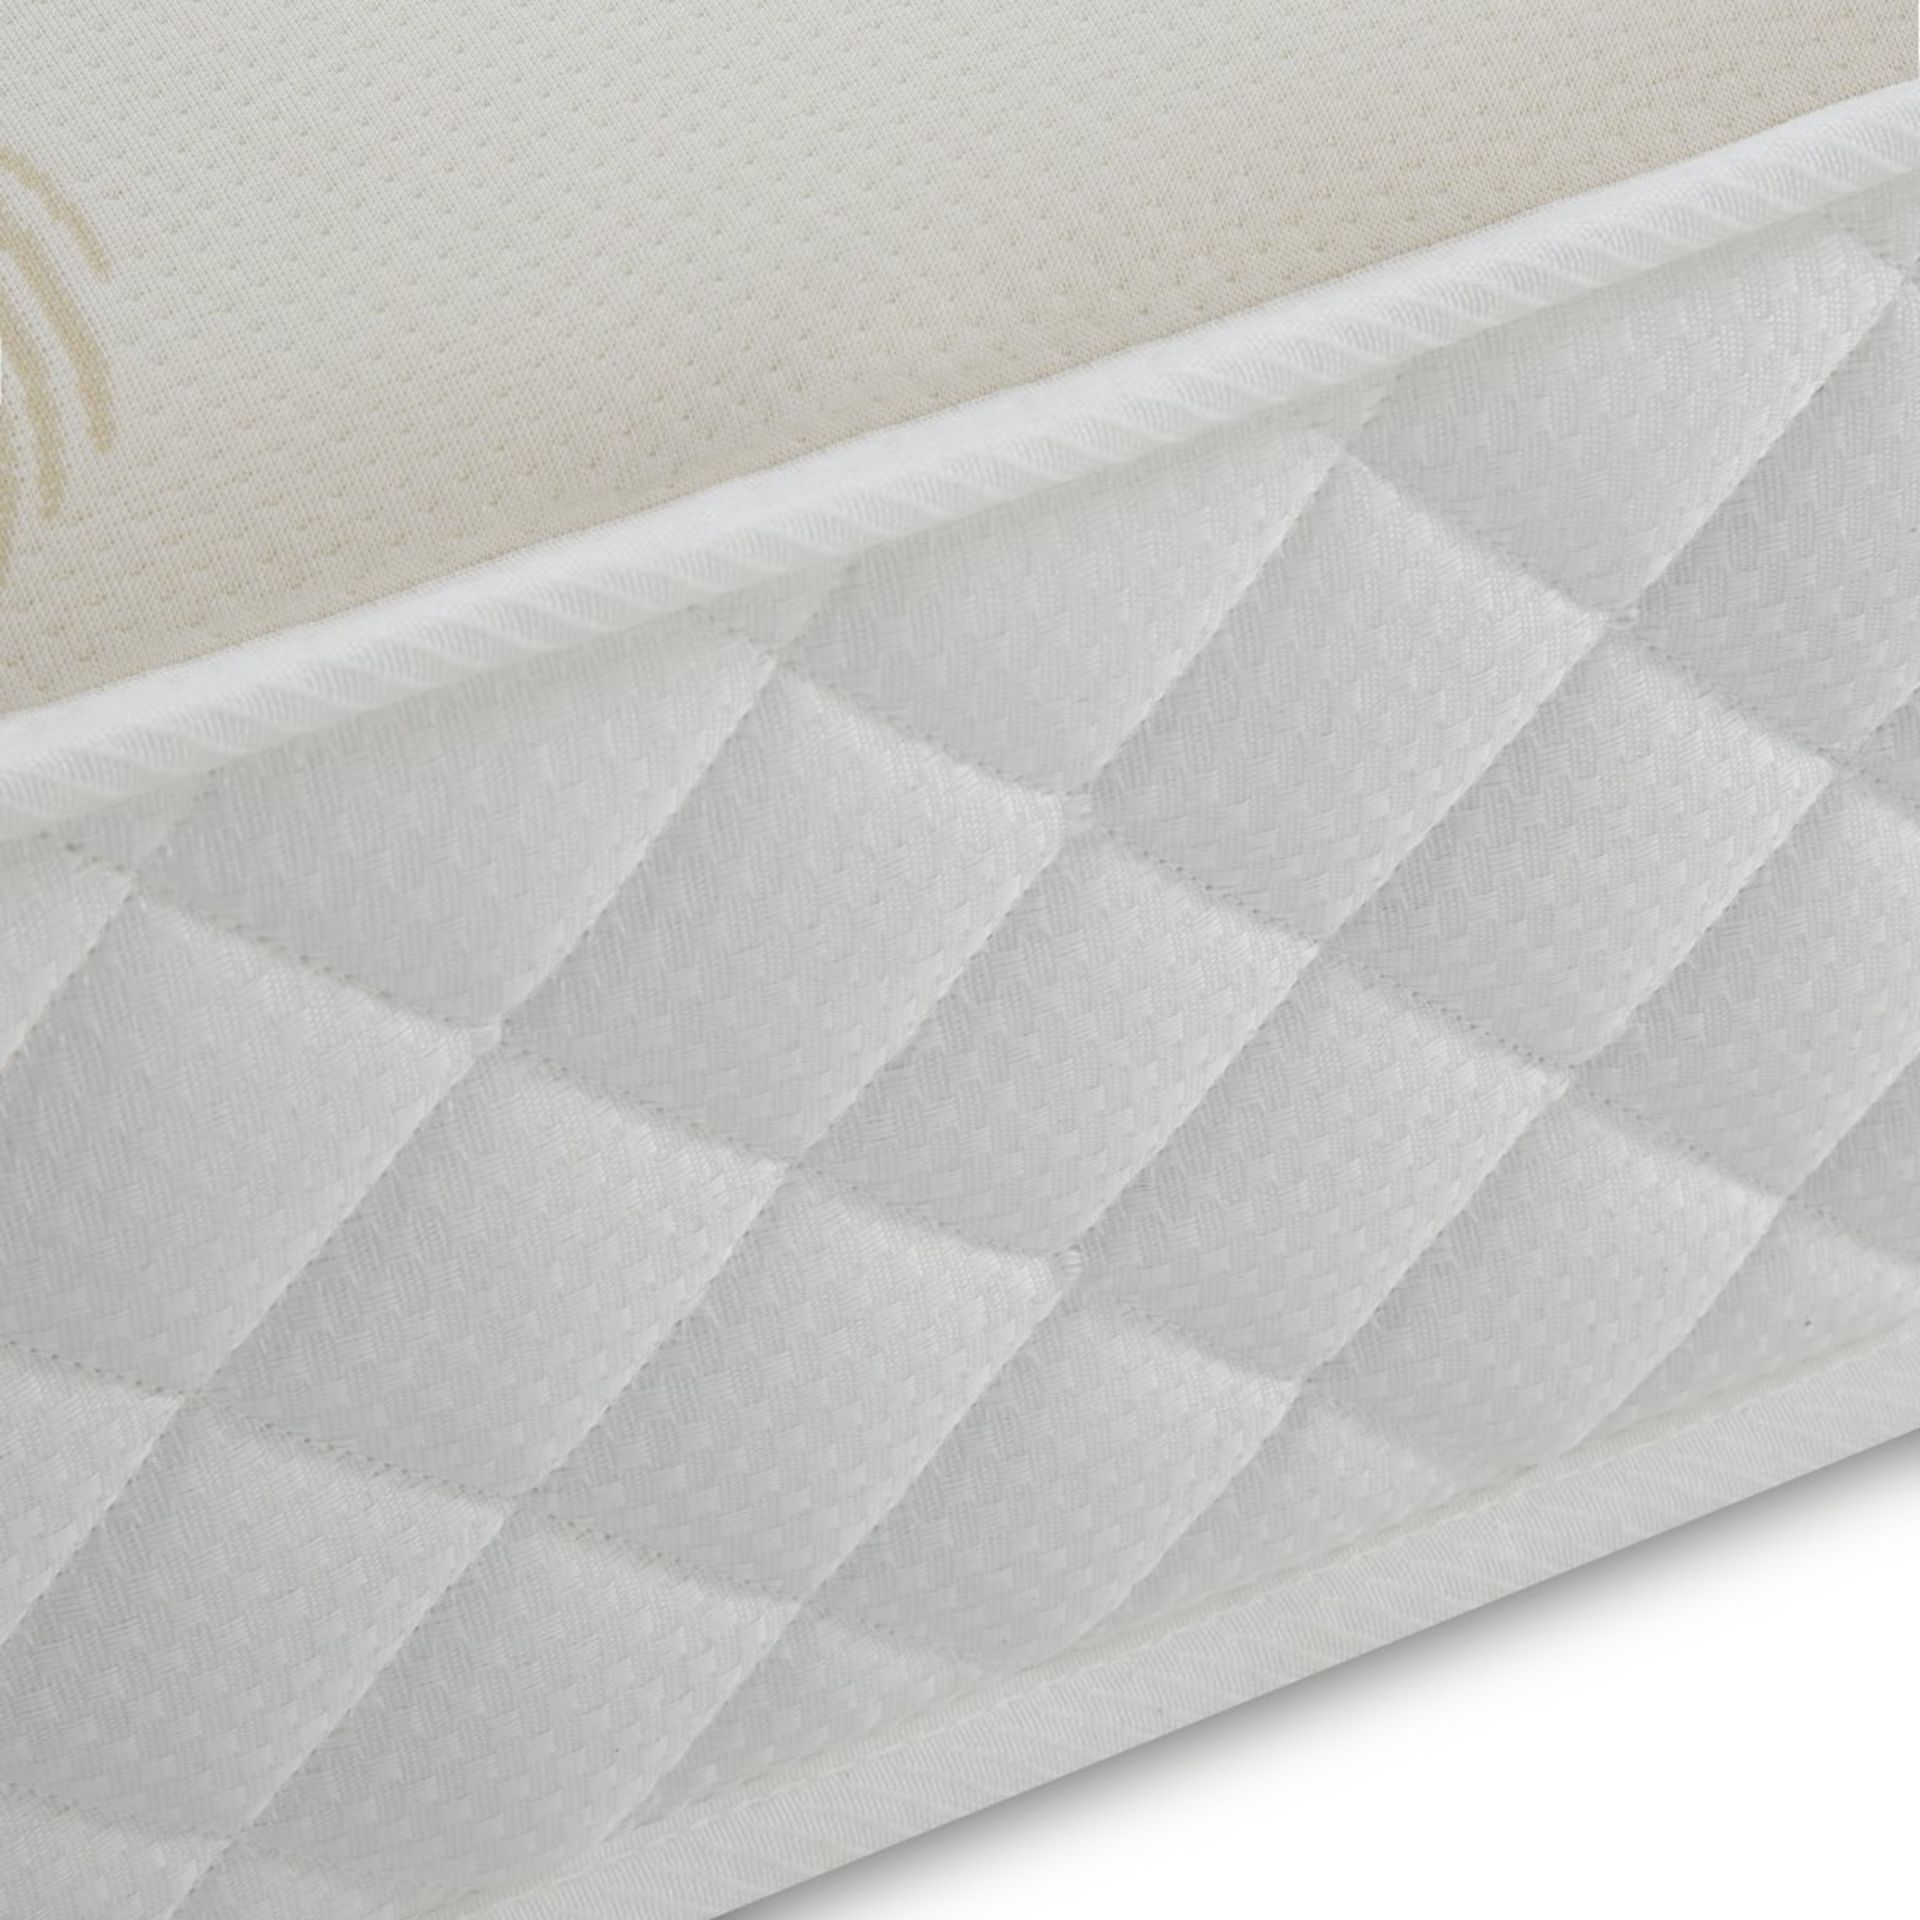 1 x King Size Open Coil Mattress With Memory Foam - Firmness: Medium-soft - Dimensions: 150 x 23 x - Image 5 of 6